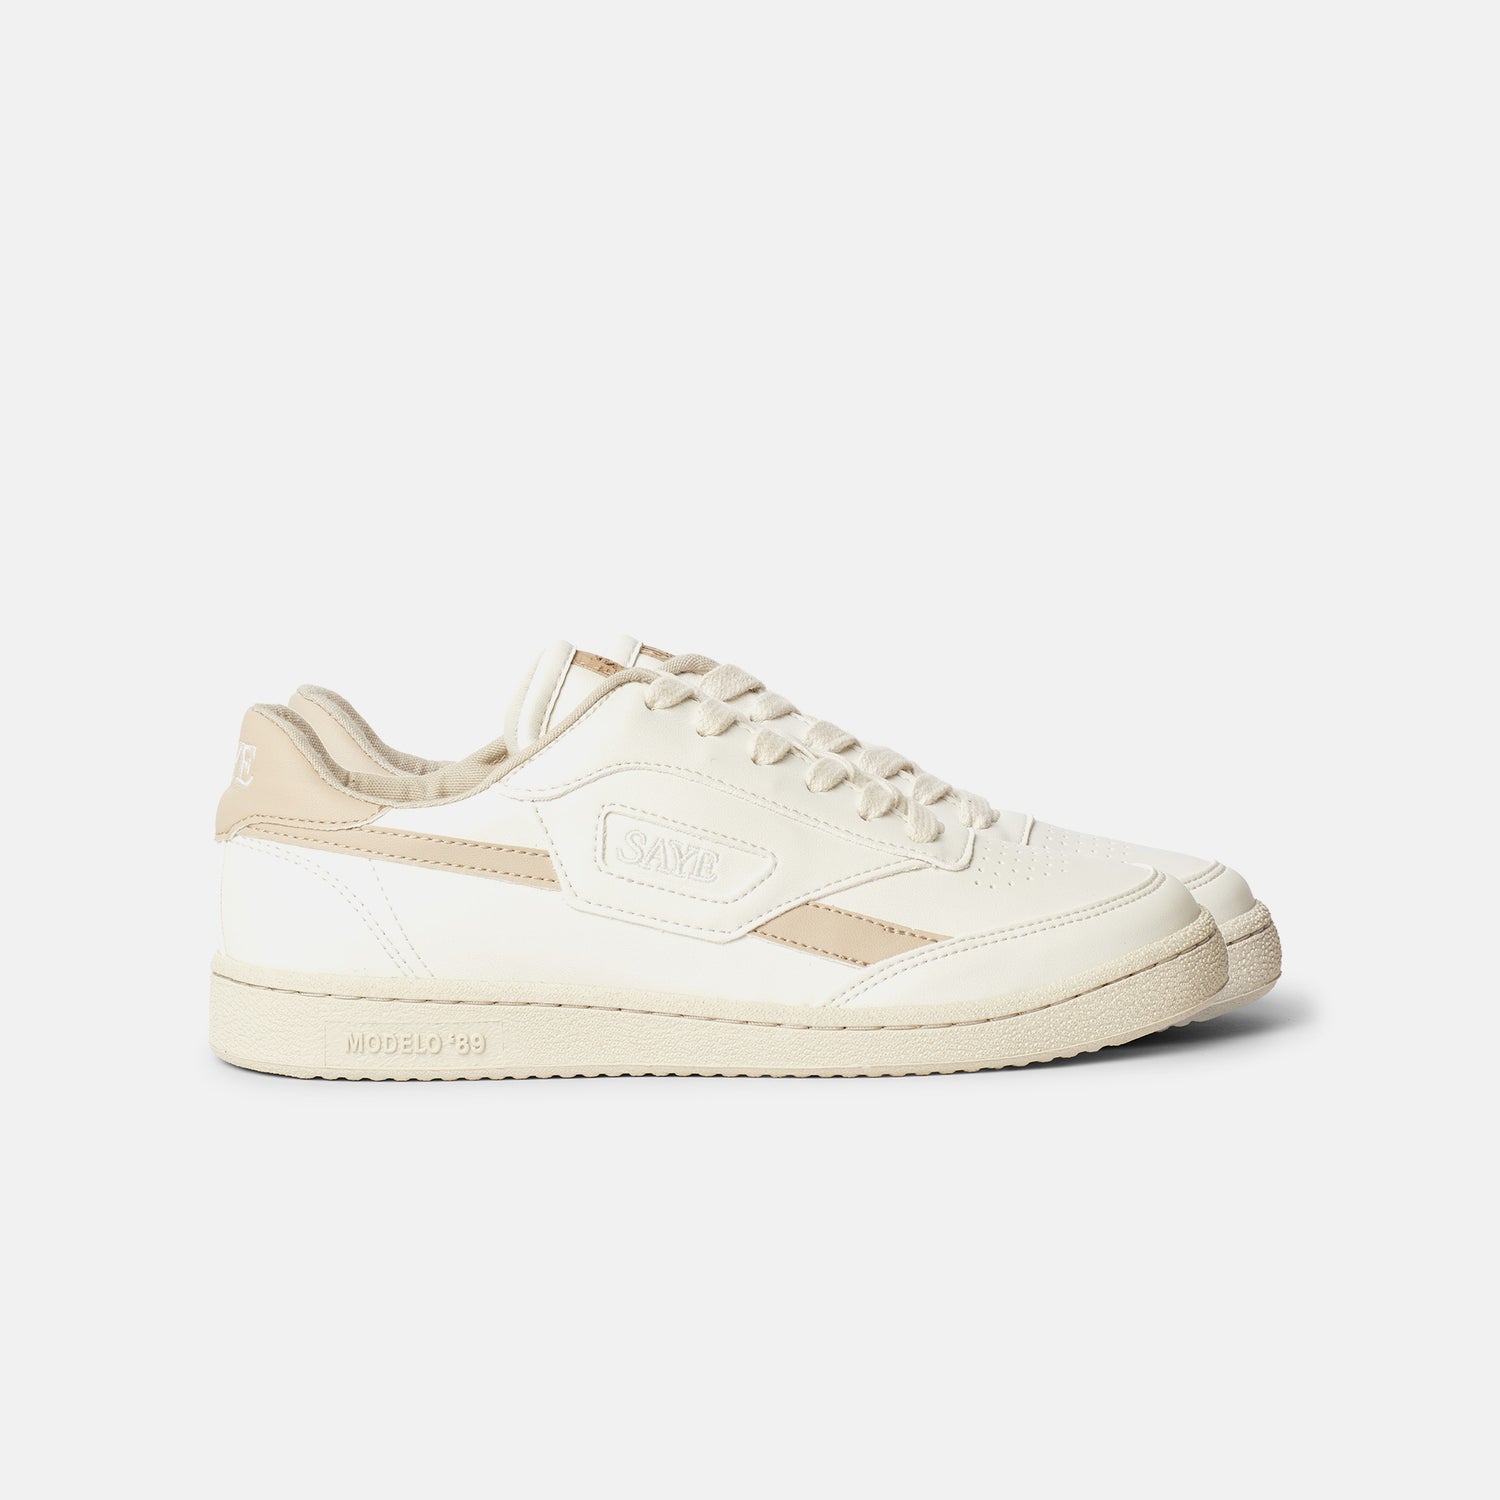 A pair of SAYE Modelo '89 Sneakers - Beige, on a white background.